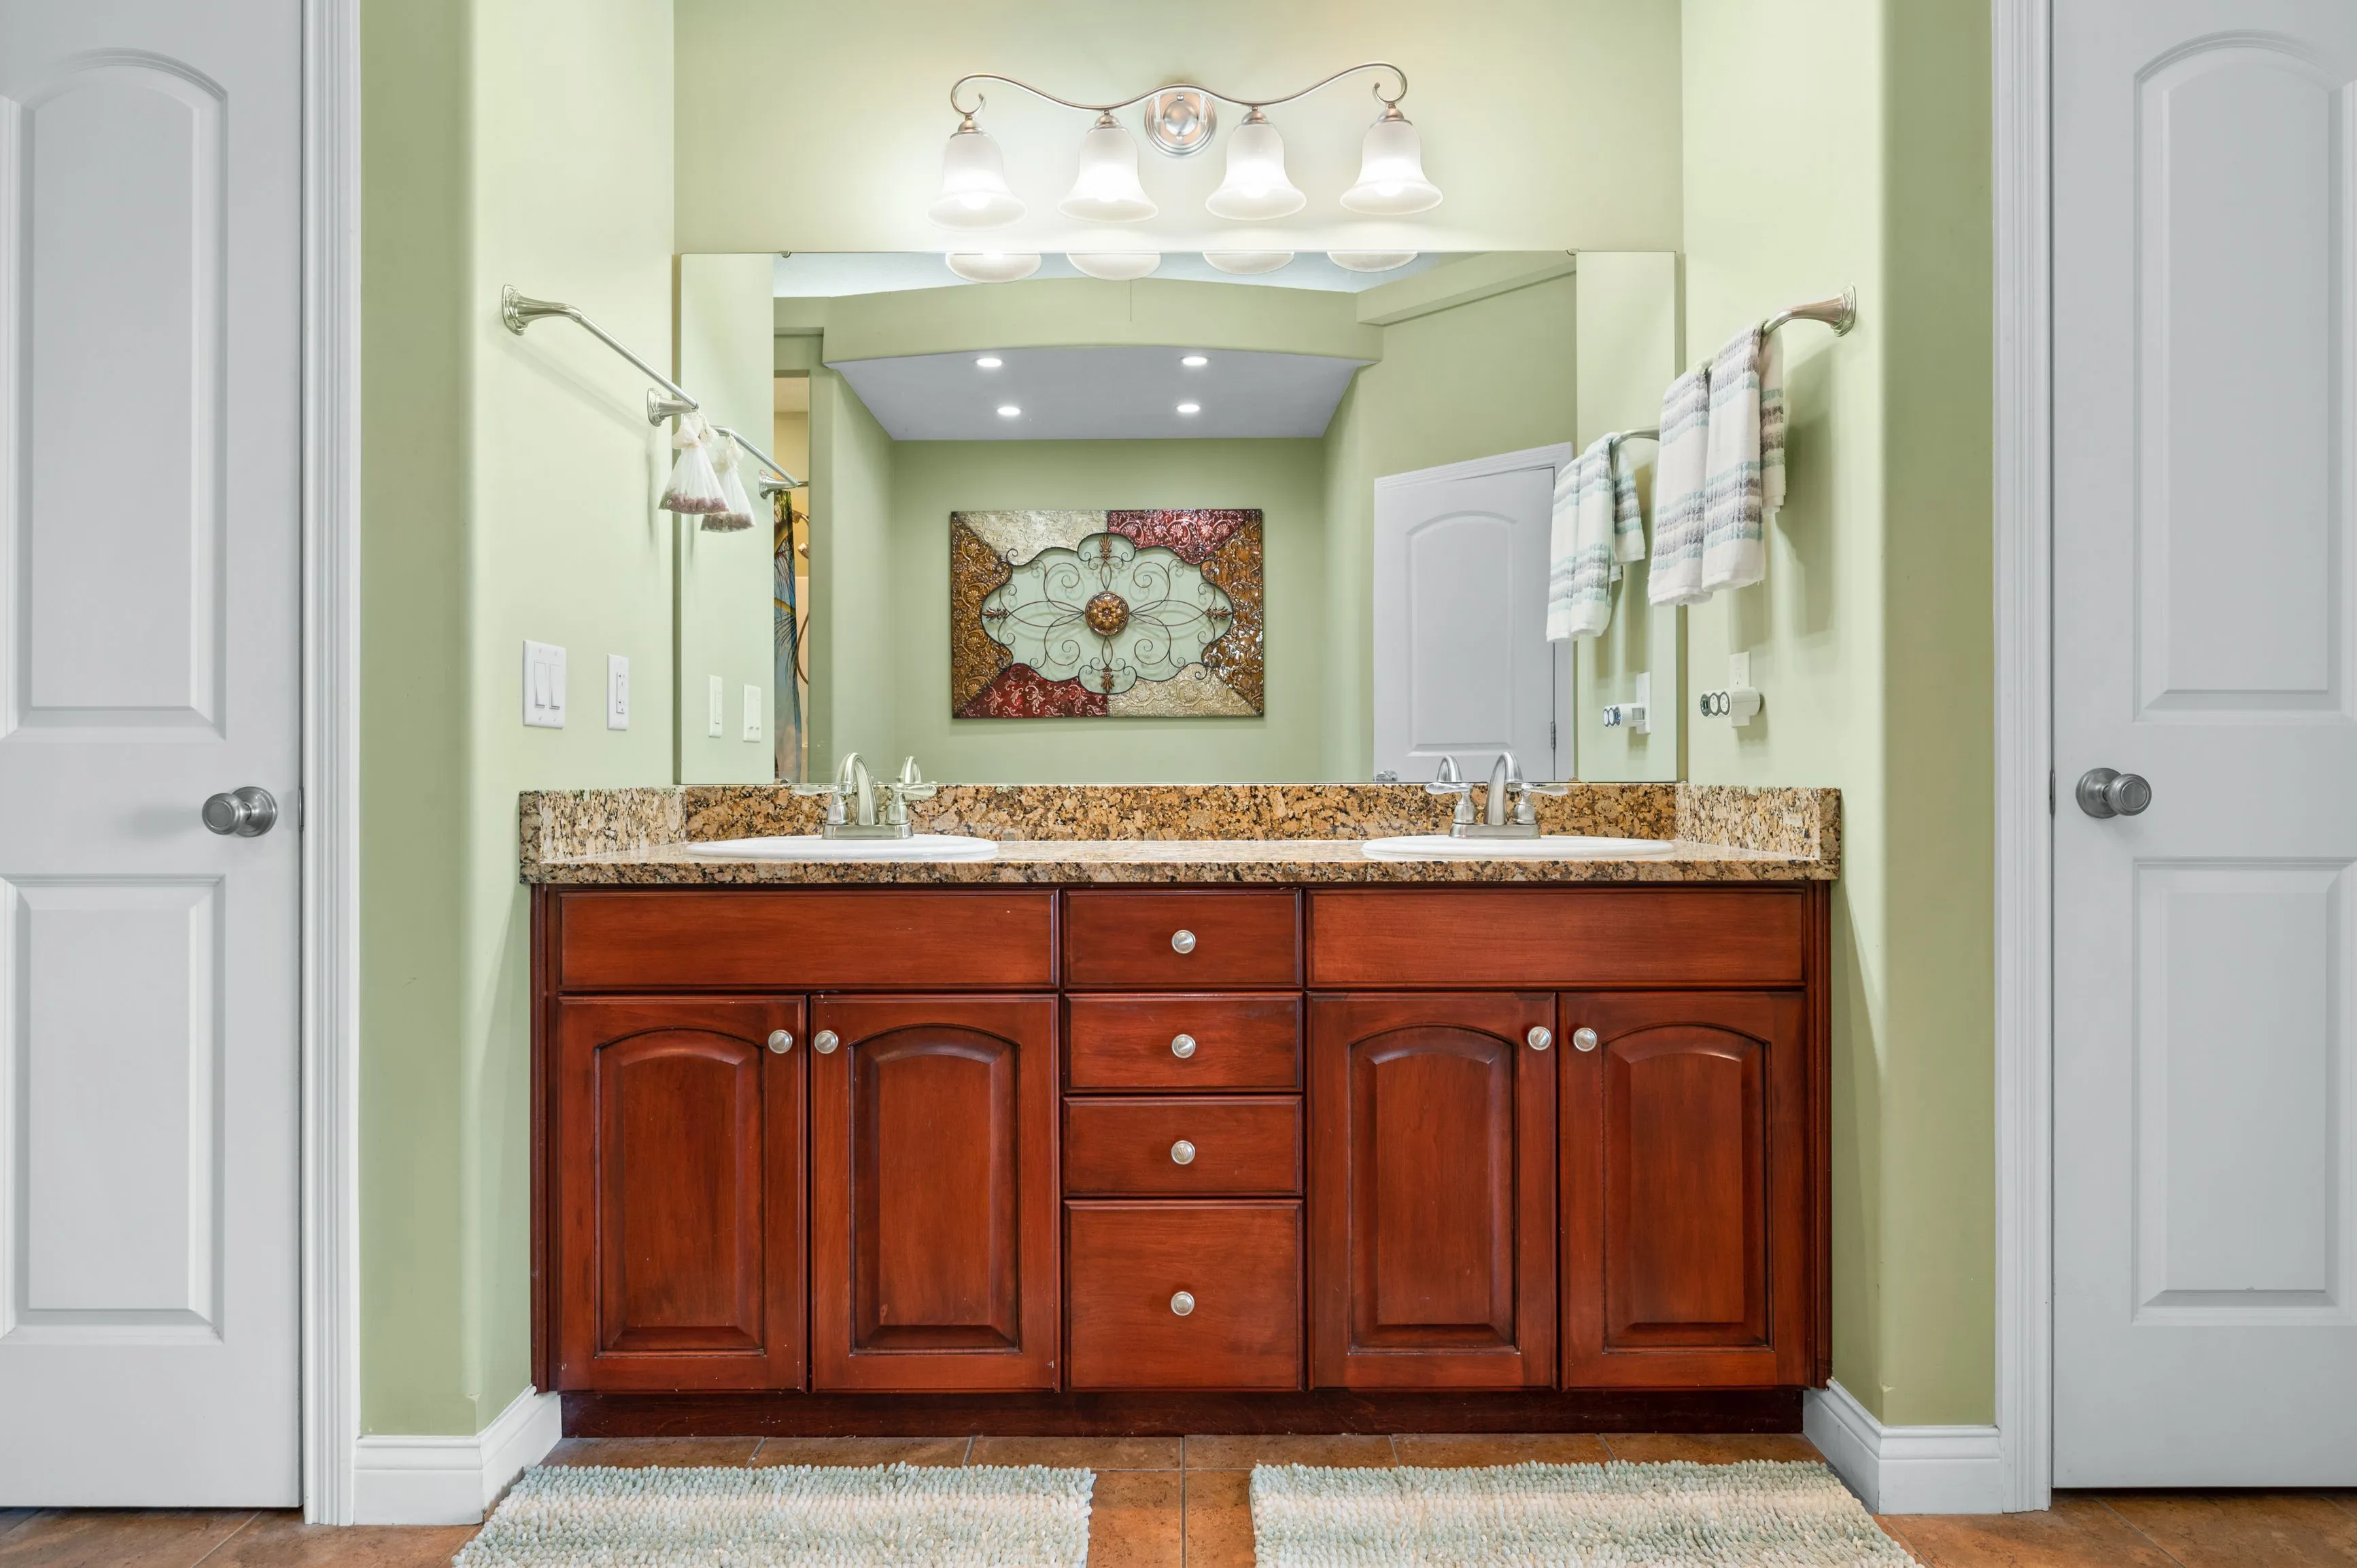 Elegant bathroom interior with cherry wood cabinets, granite countertop, and dual sinks with large mirror above.